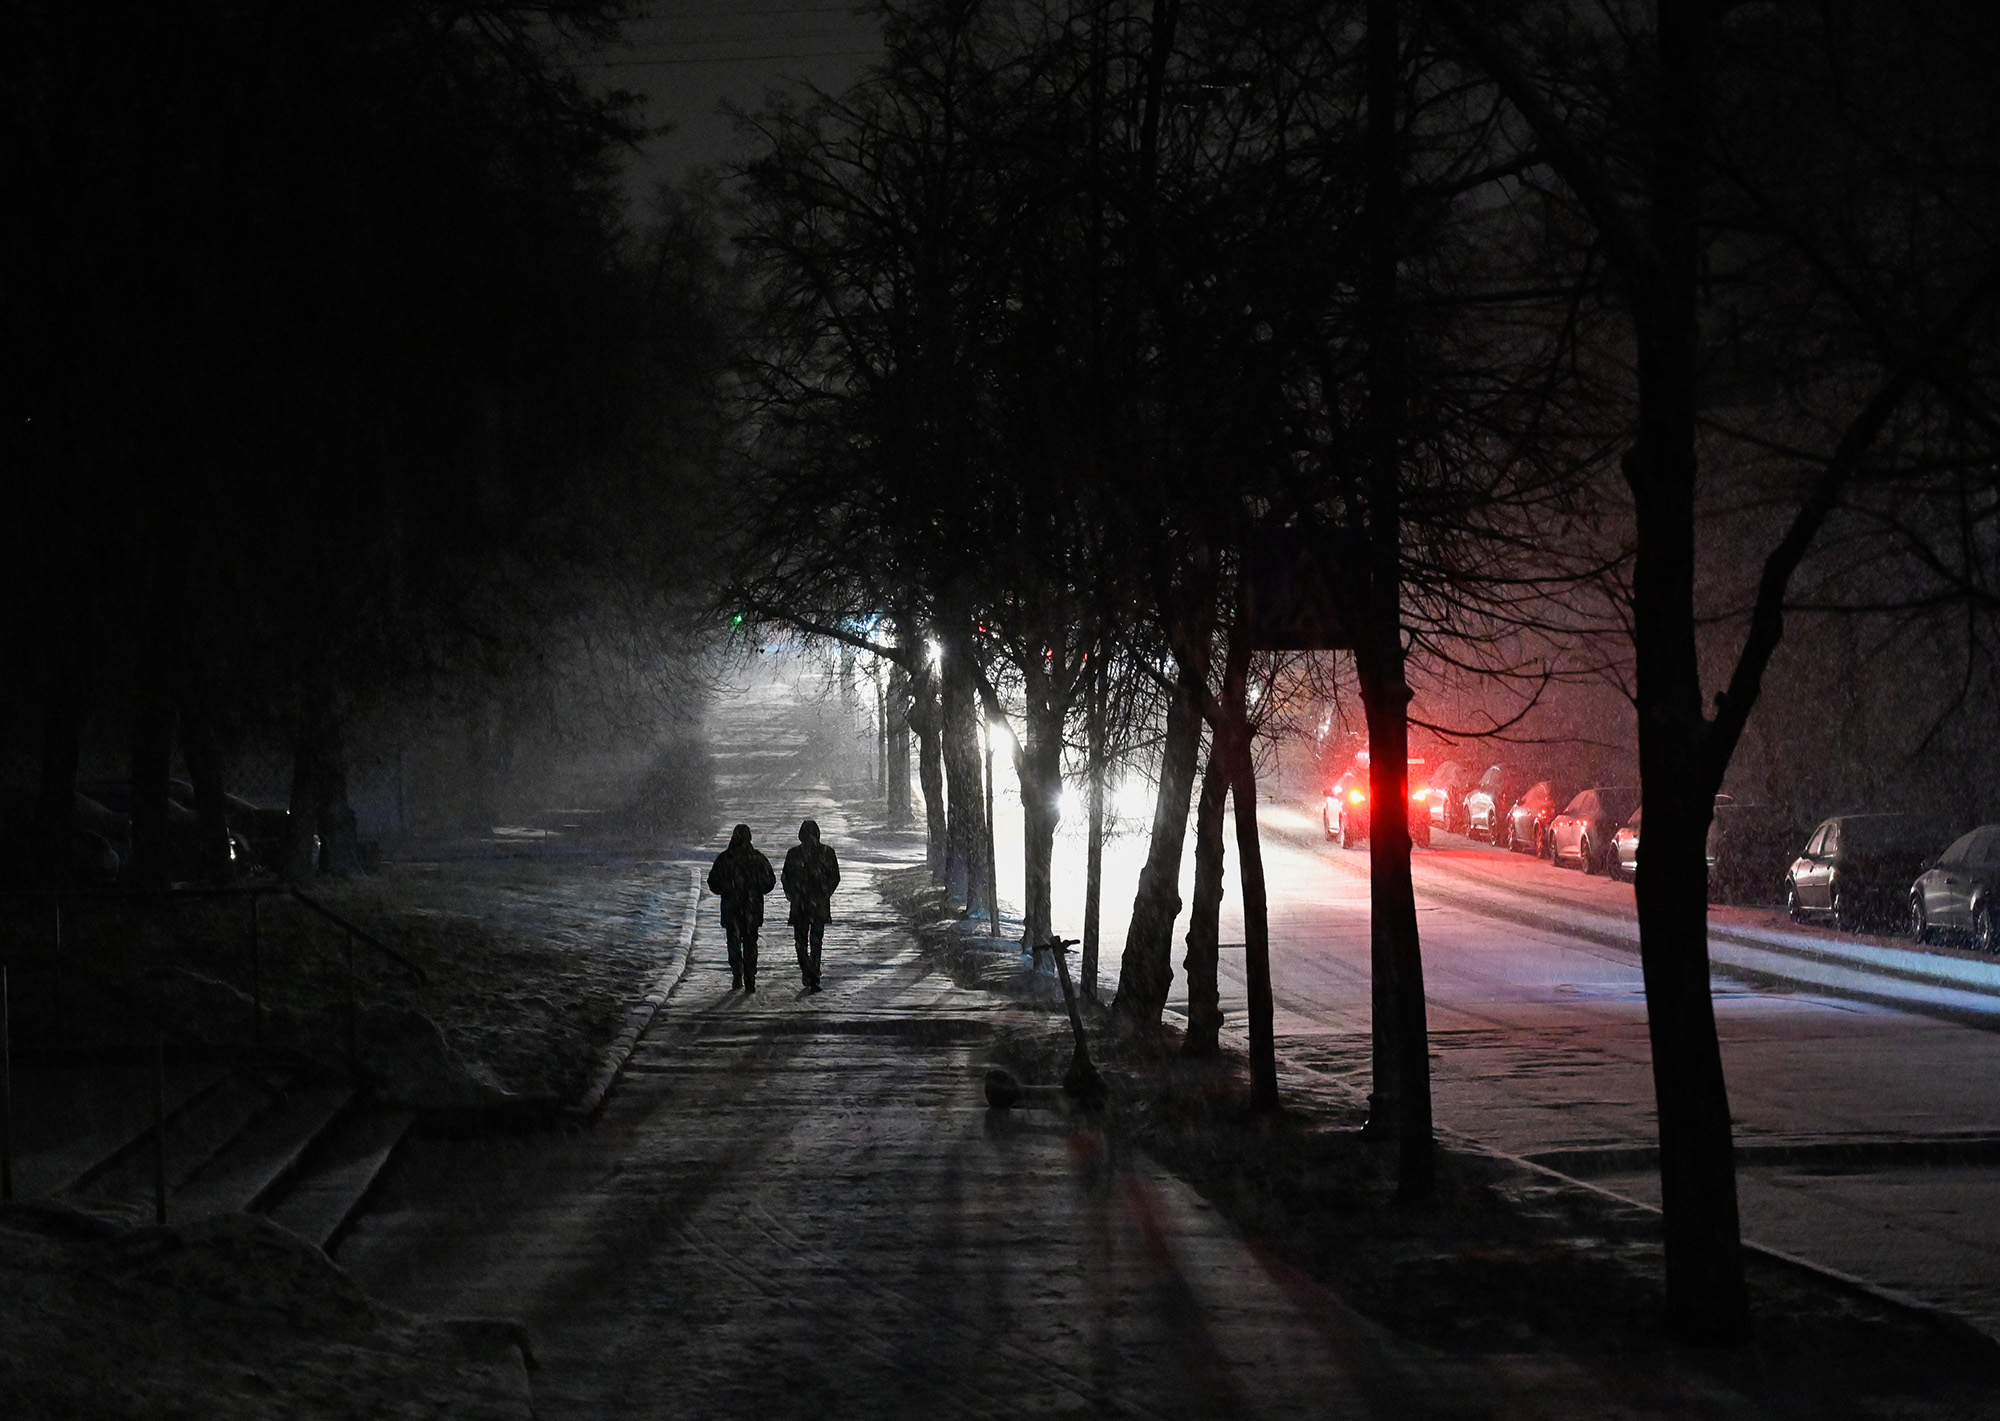 People walk down a dark street in Kyiv, Ukraine, during an energy black out on December 26.